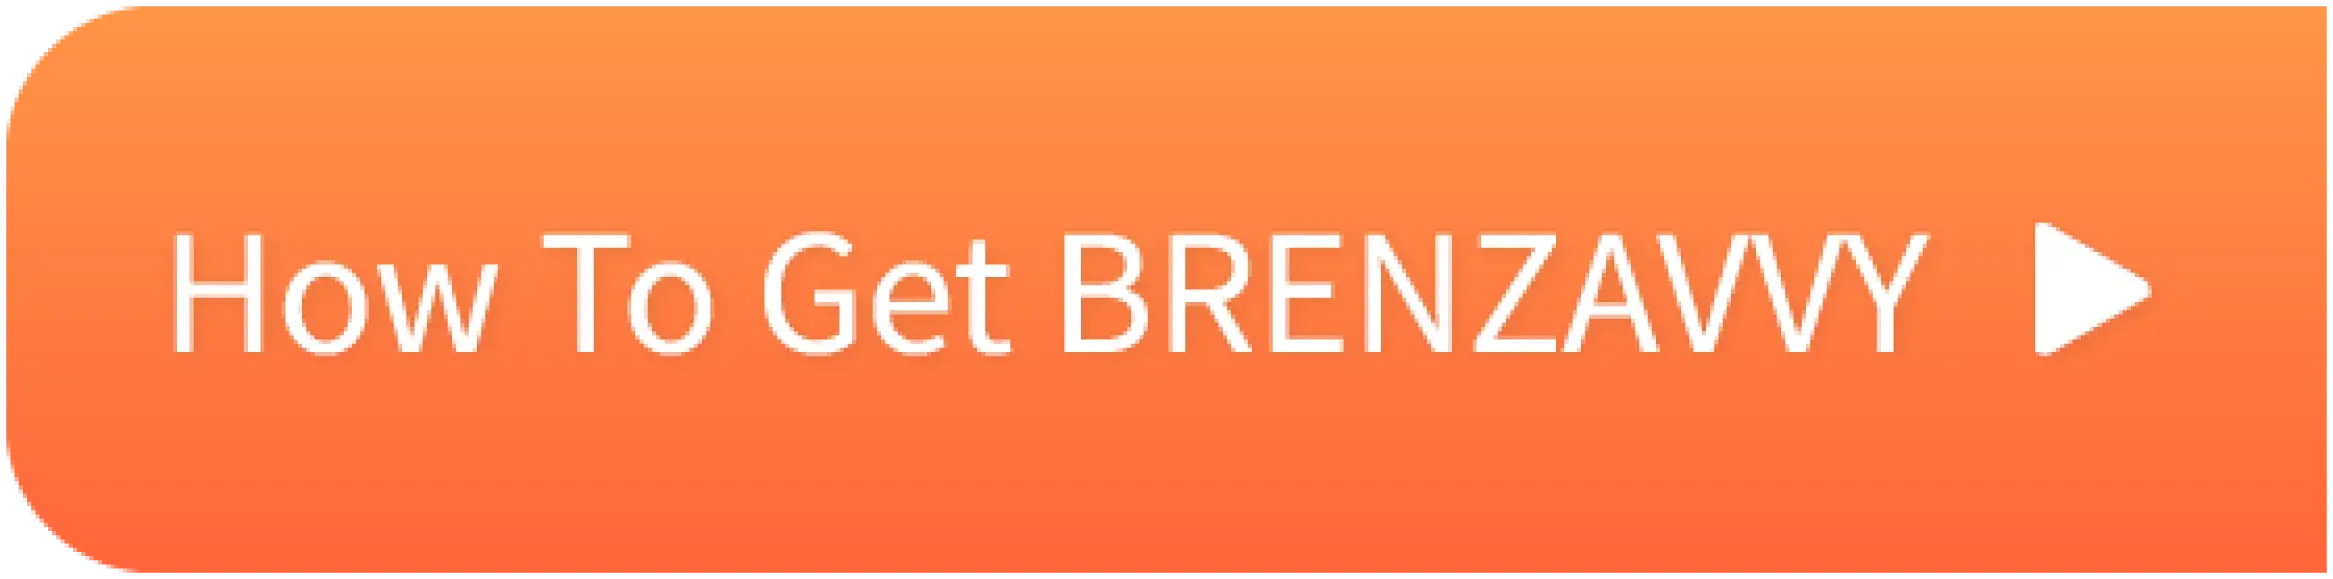 How to get Brenzavvy home page